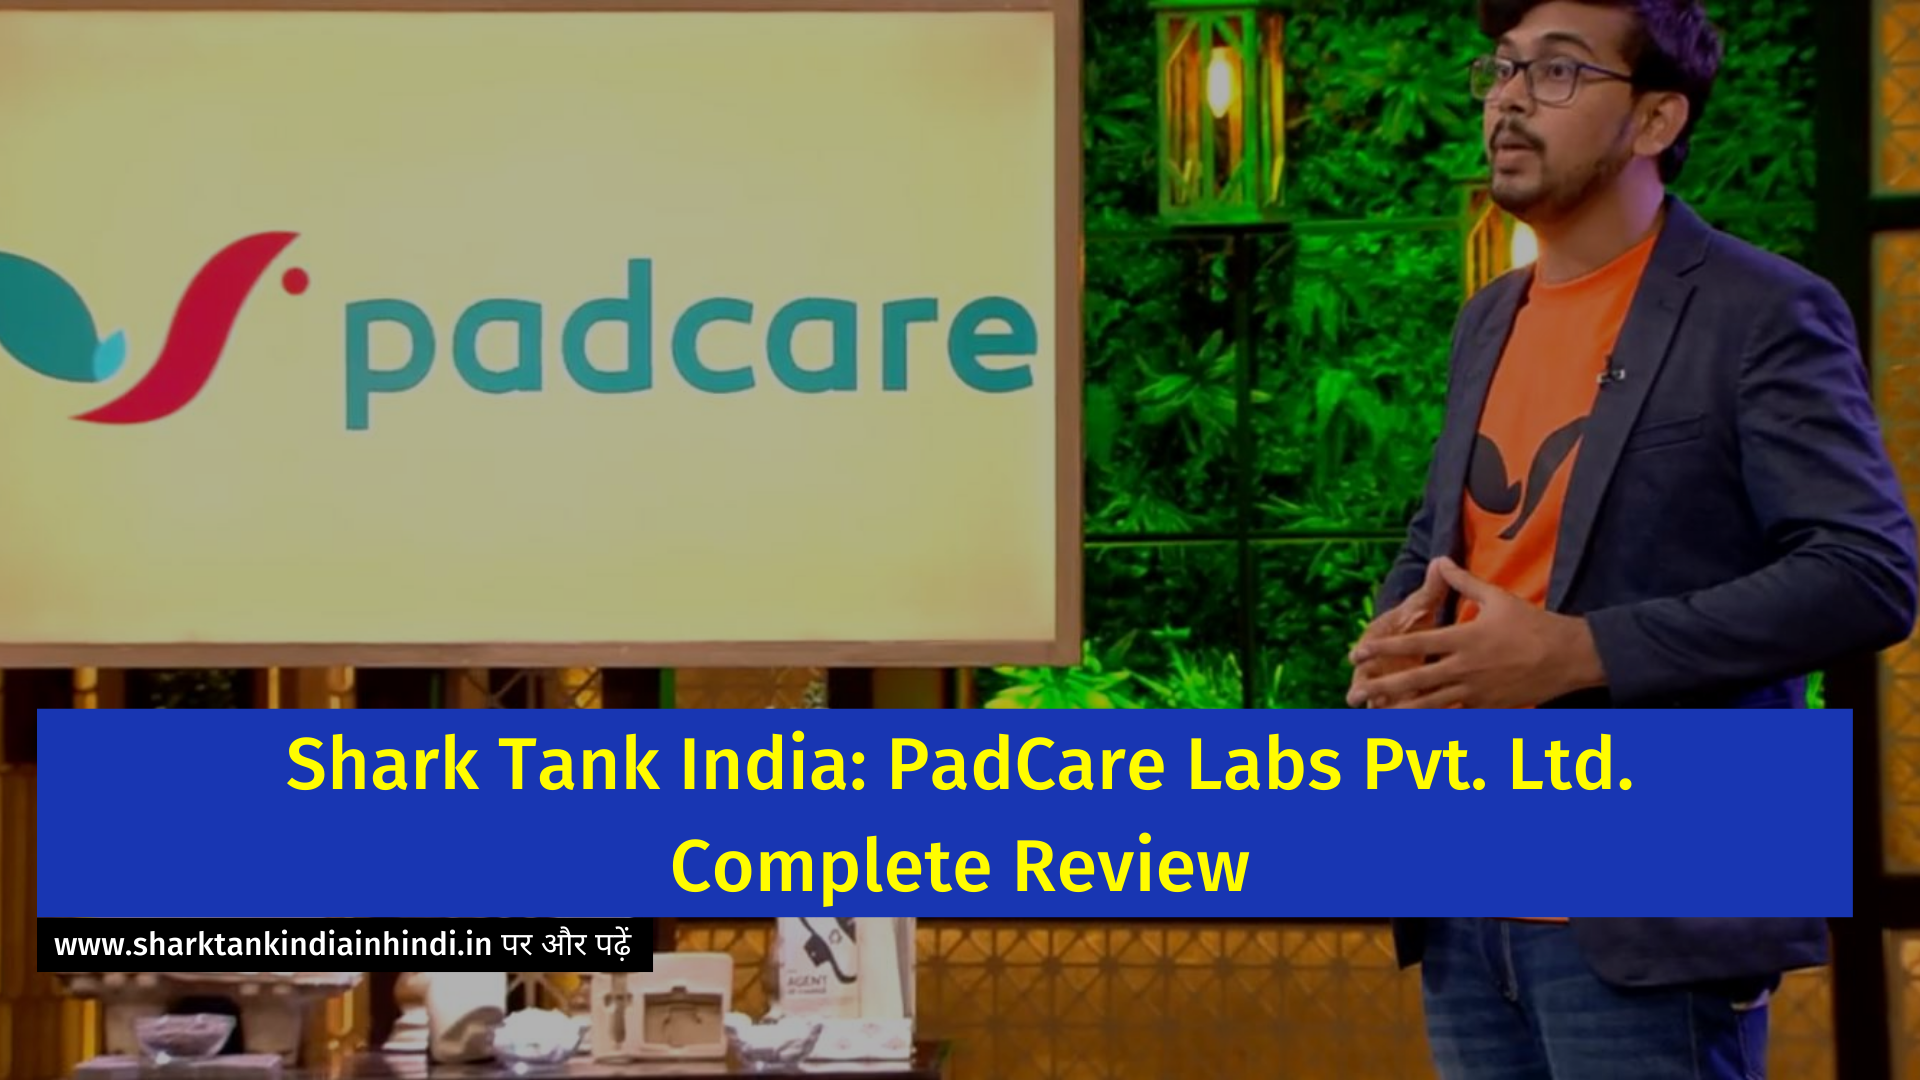 Shark Tank India: PadCare Labs Pvt. Ltd. Complete Review